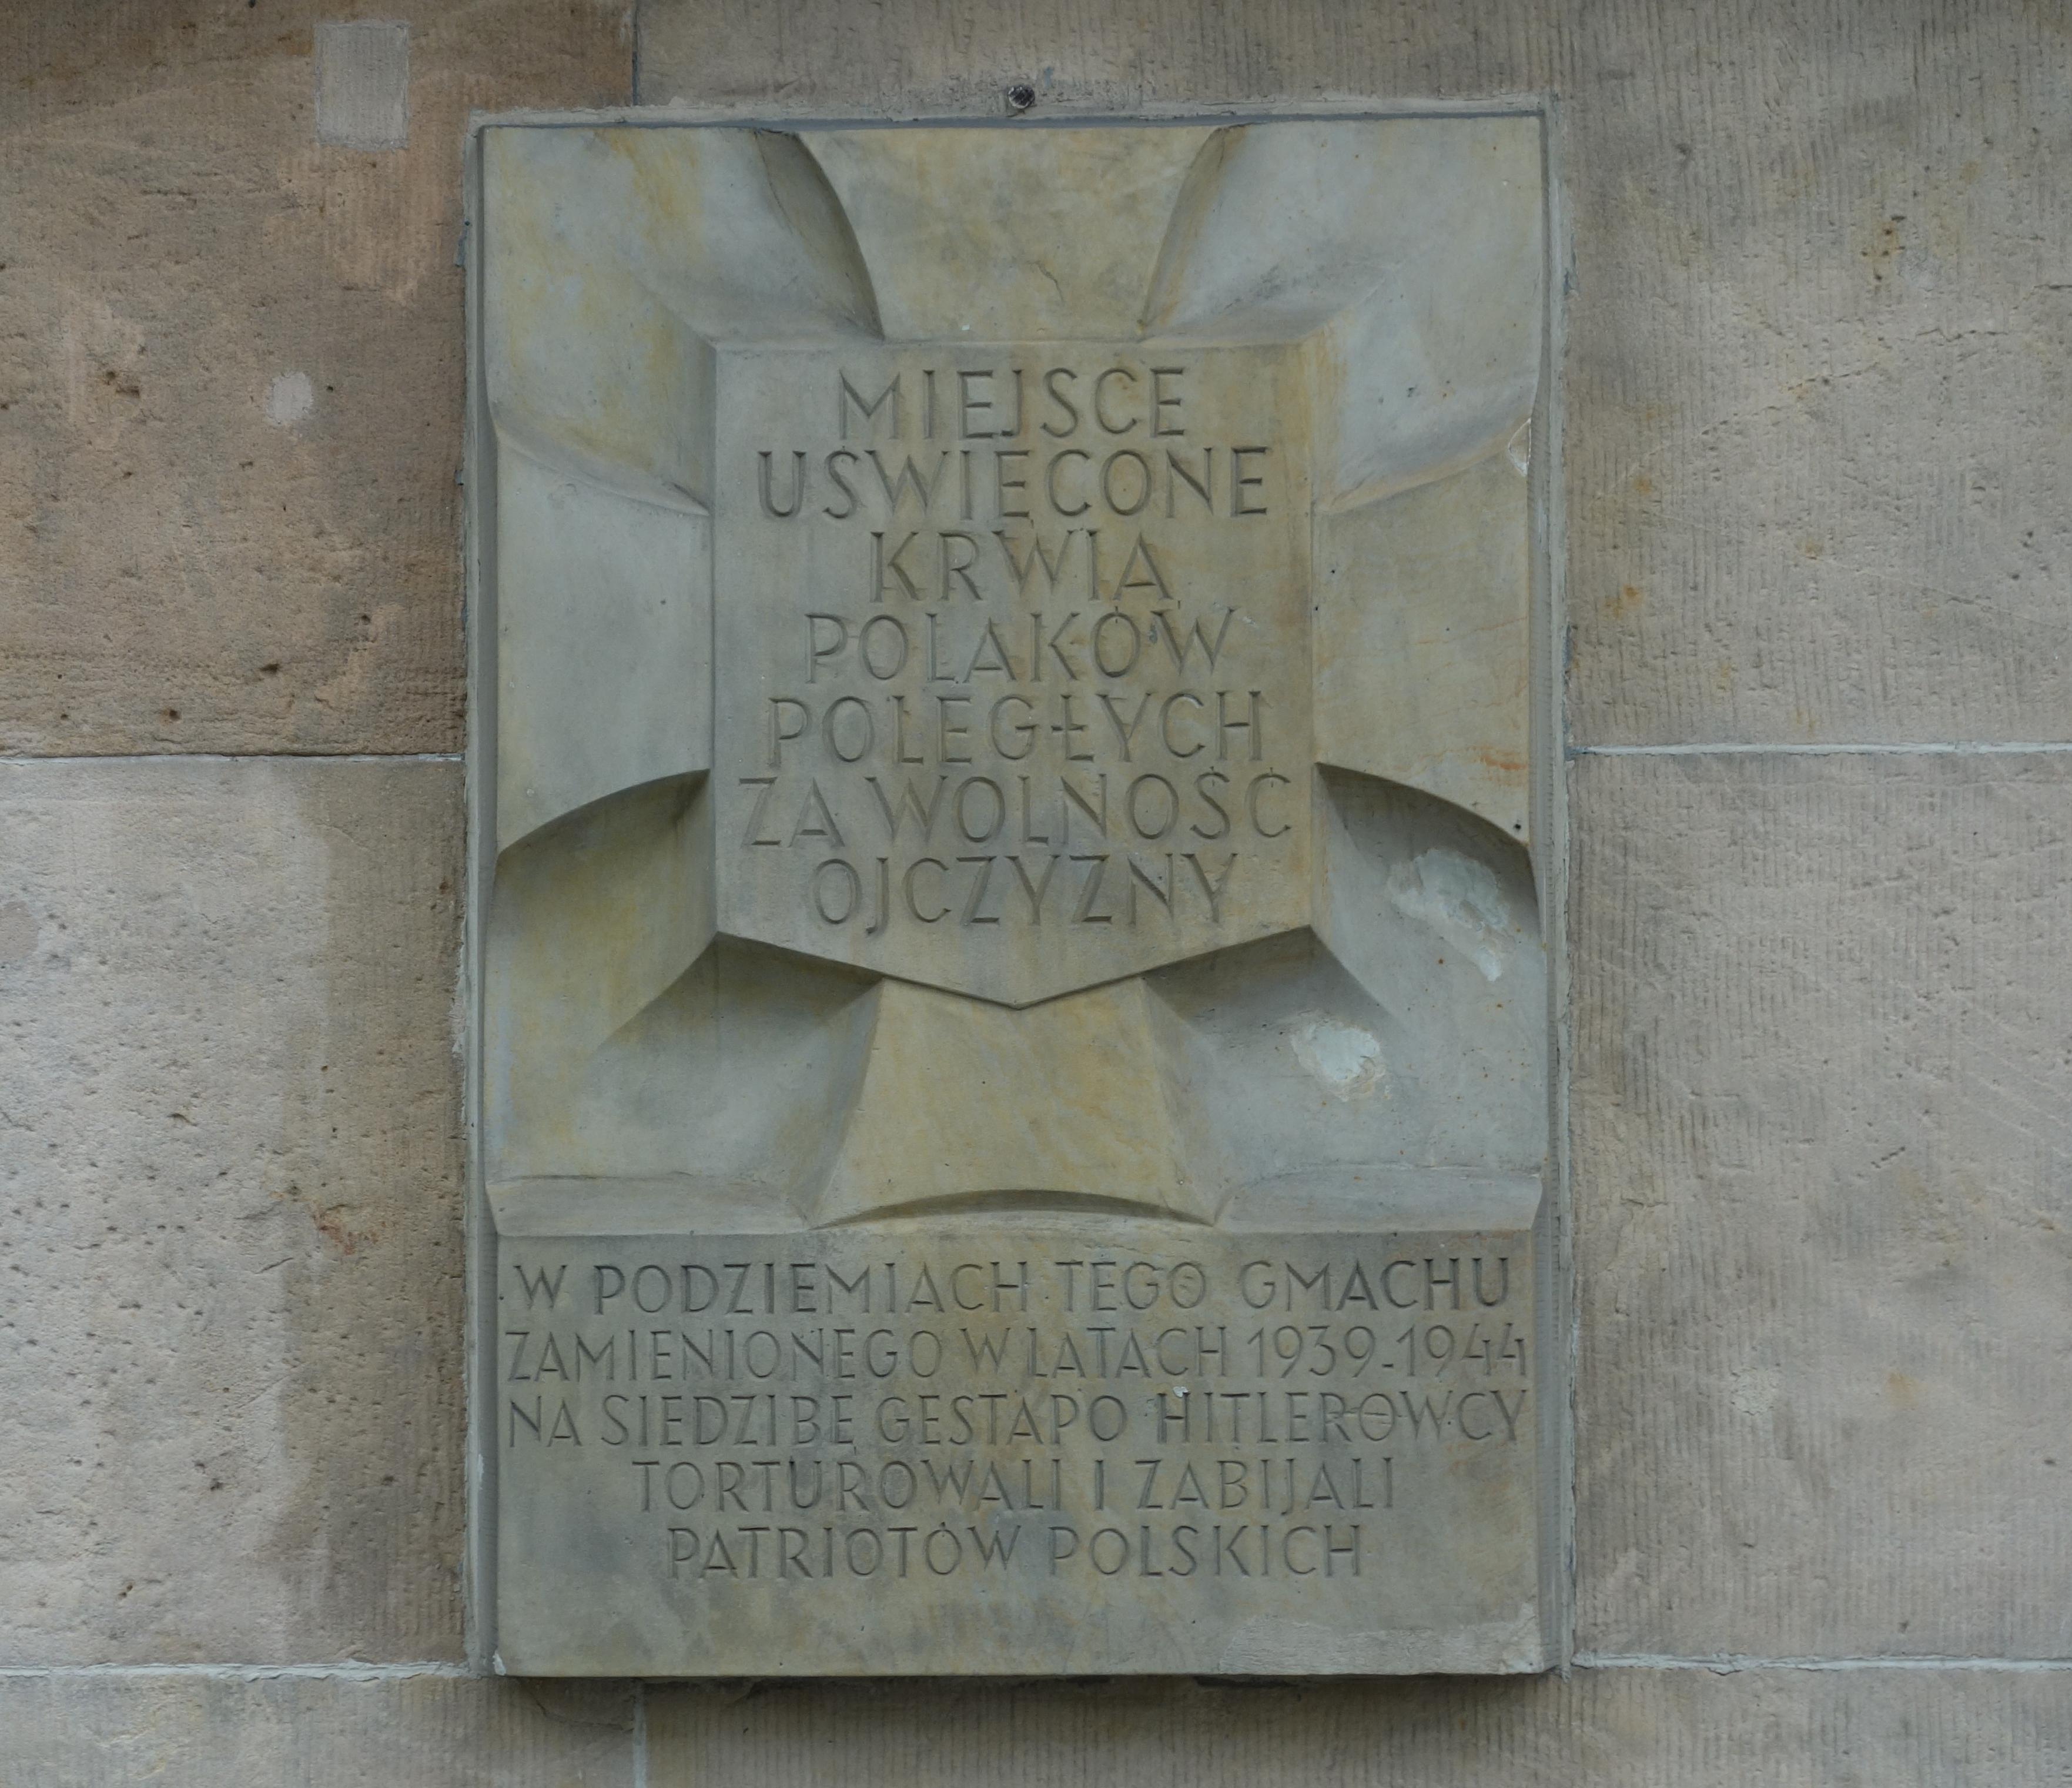 Plaque commemorating Poles murdered by Germans in Warsaw during WWII